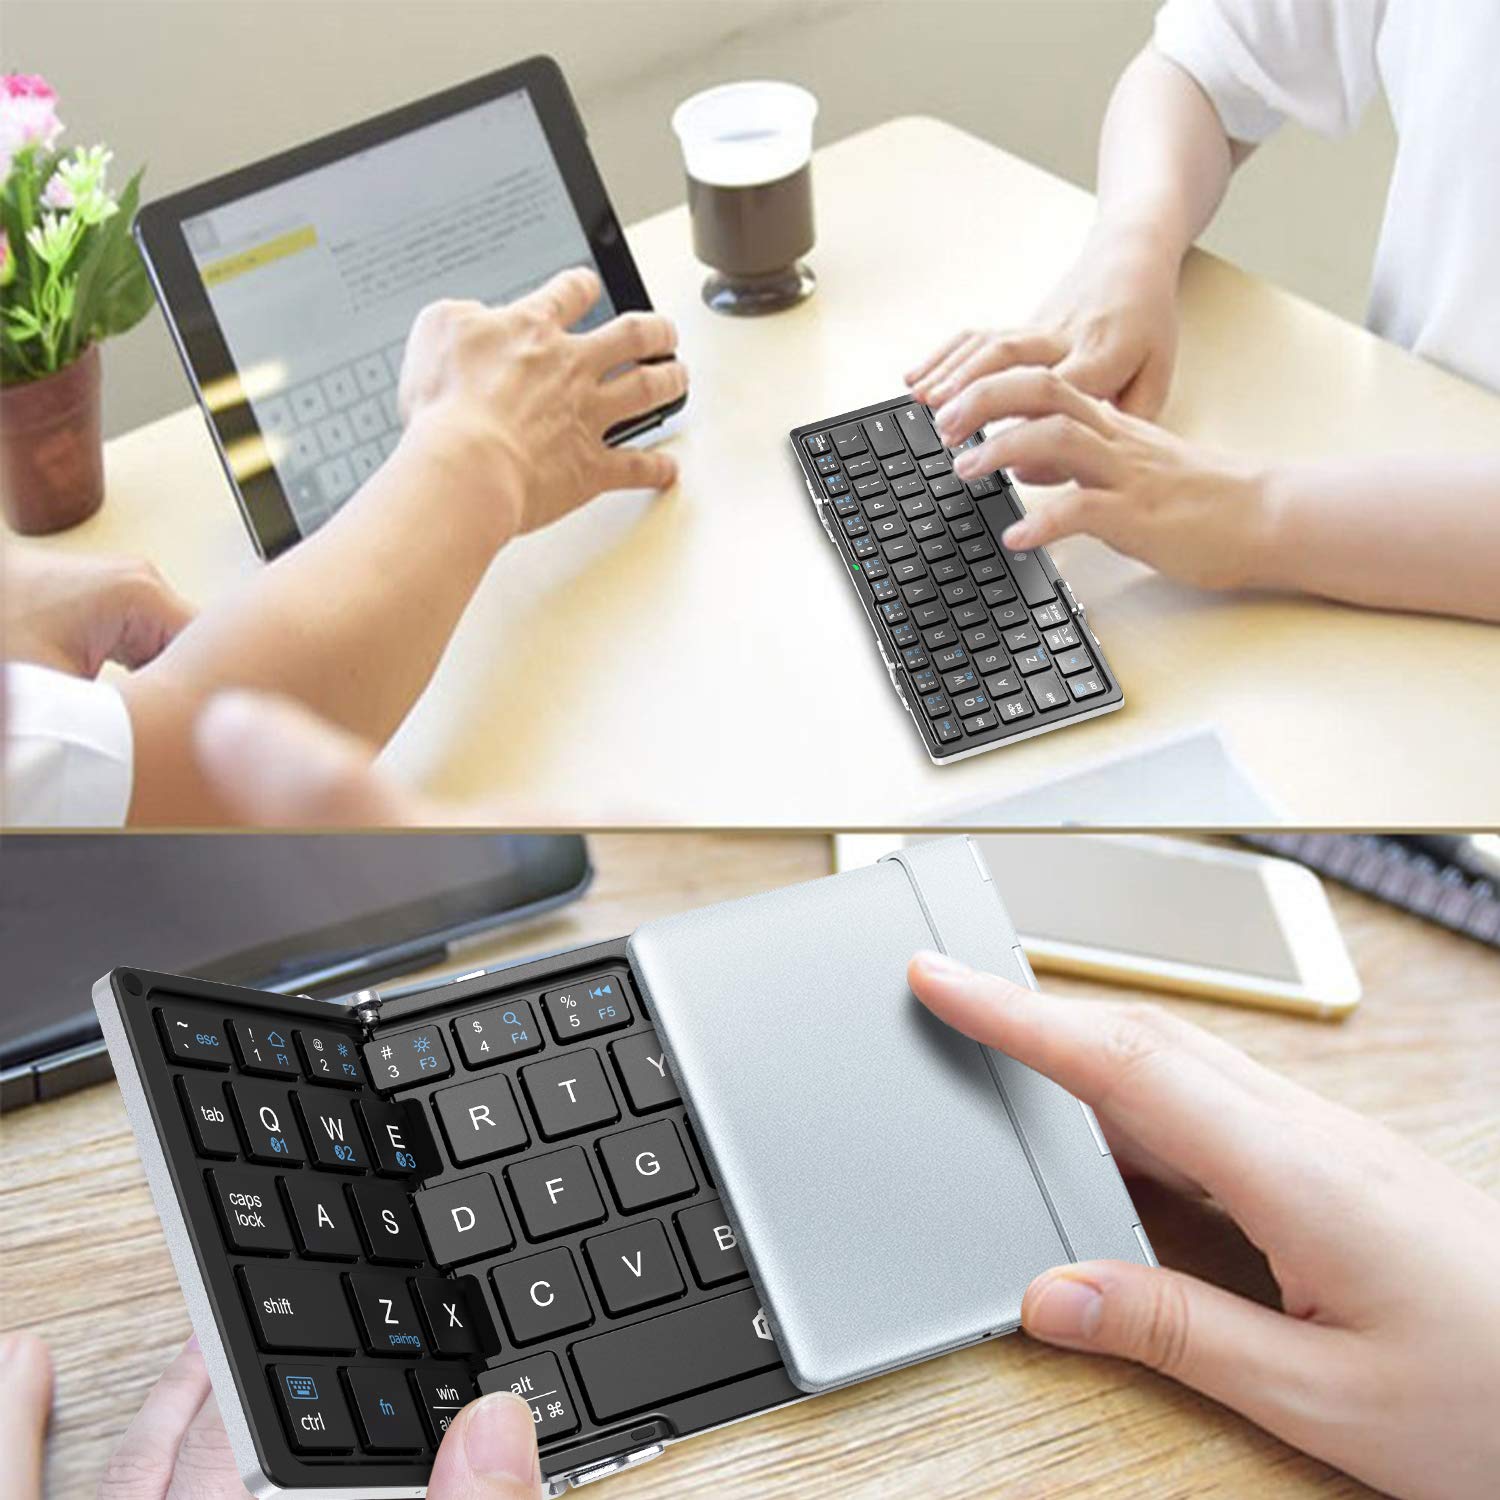 iClever Portable Folding Keyboard, Ultra Slim Pocket Size Bluetooth Keyboard Wireless with Carry Pouch, Aluminum Alloy Housing, Designed for iOS Android Windows Better Typing, Silver (BK03)